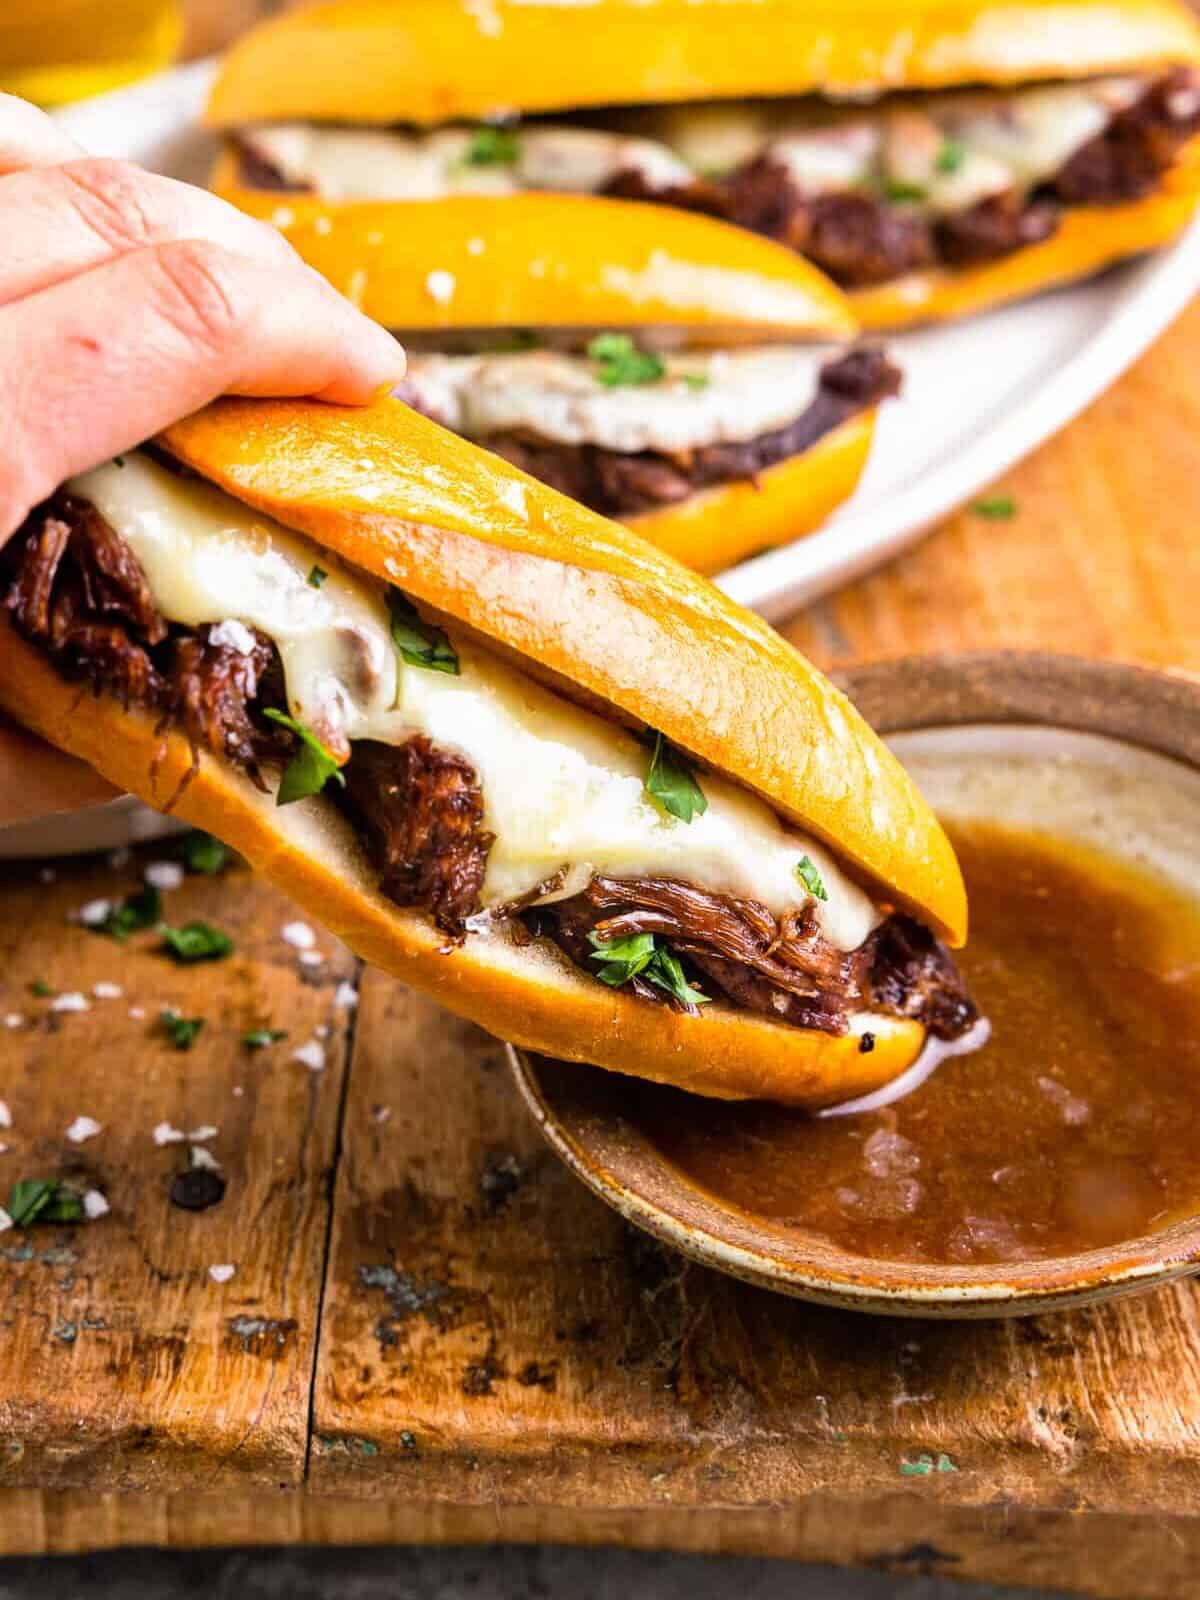 side view of a hand dipping a crockpot french dip sandwich into a side of au jus.